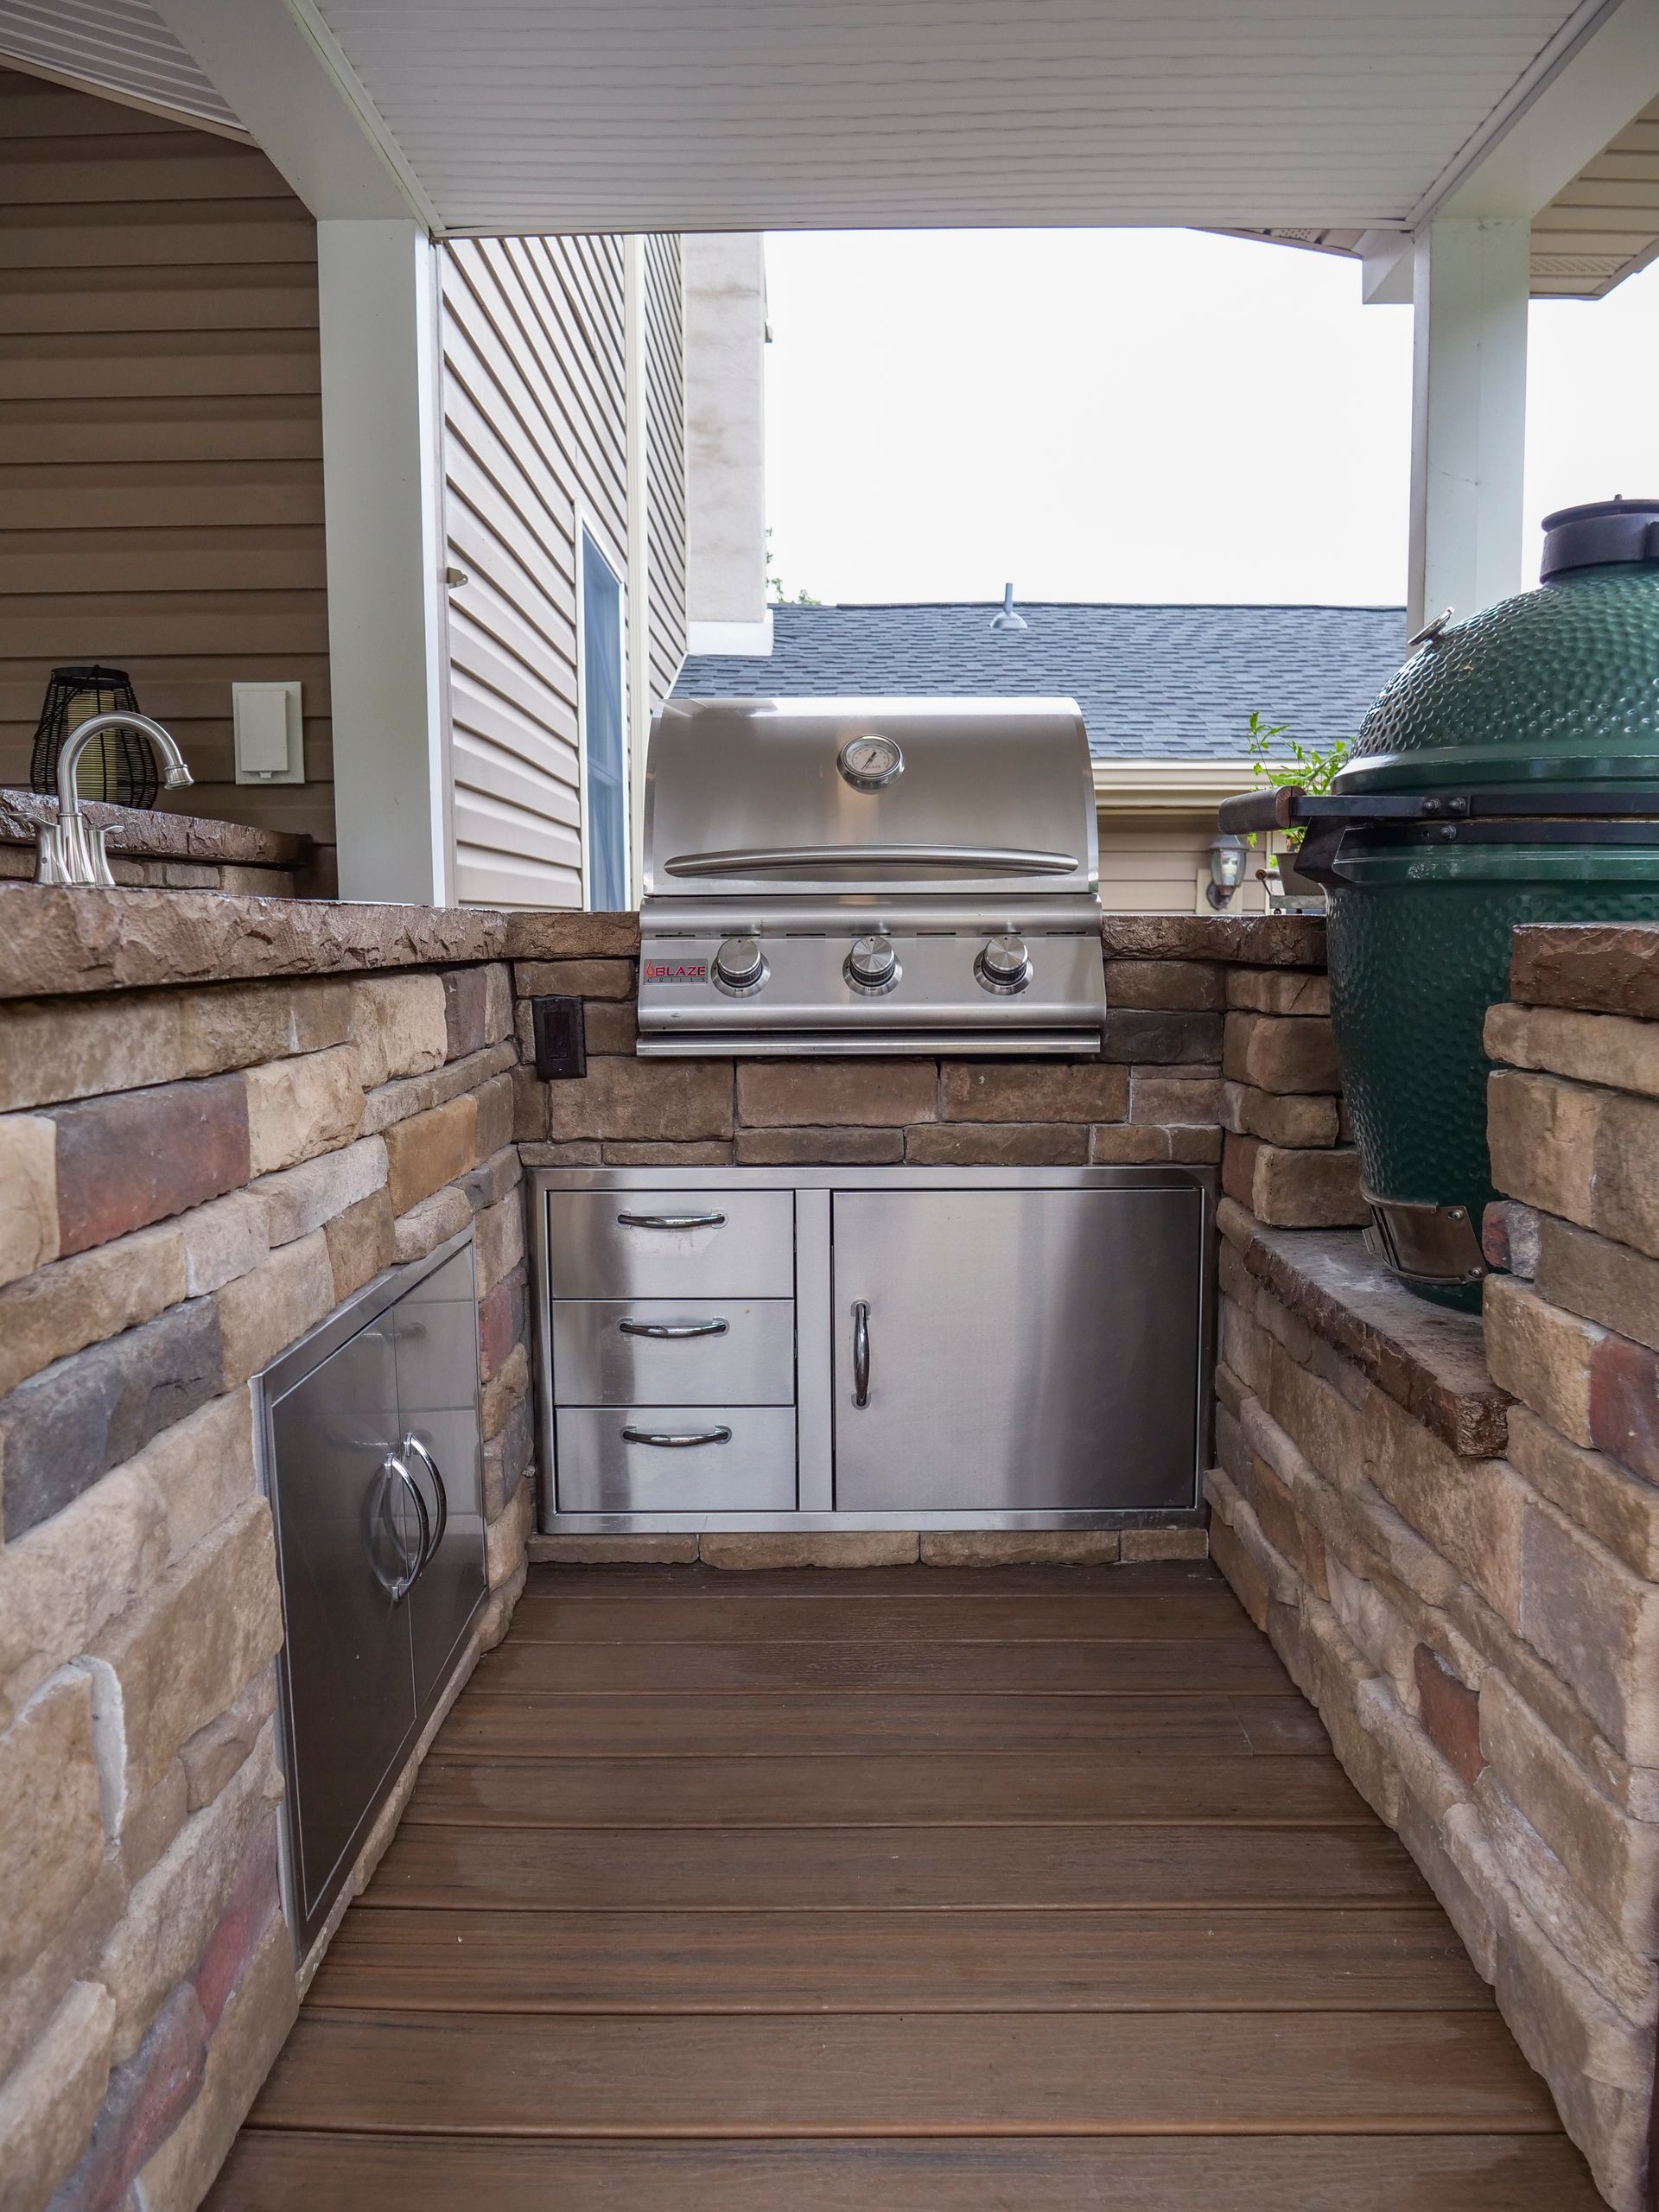 The best kitchen layouts and custom outdoor kitchen designs in PA